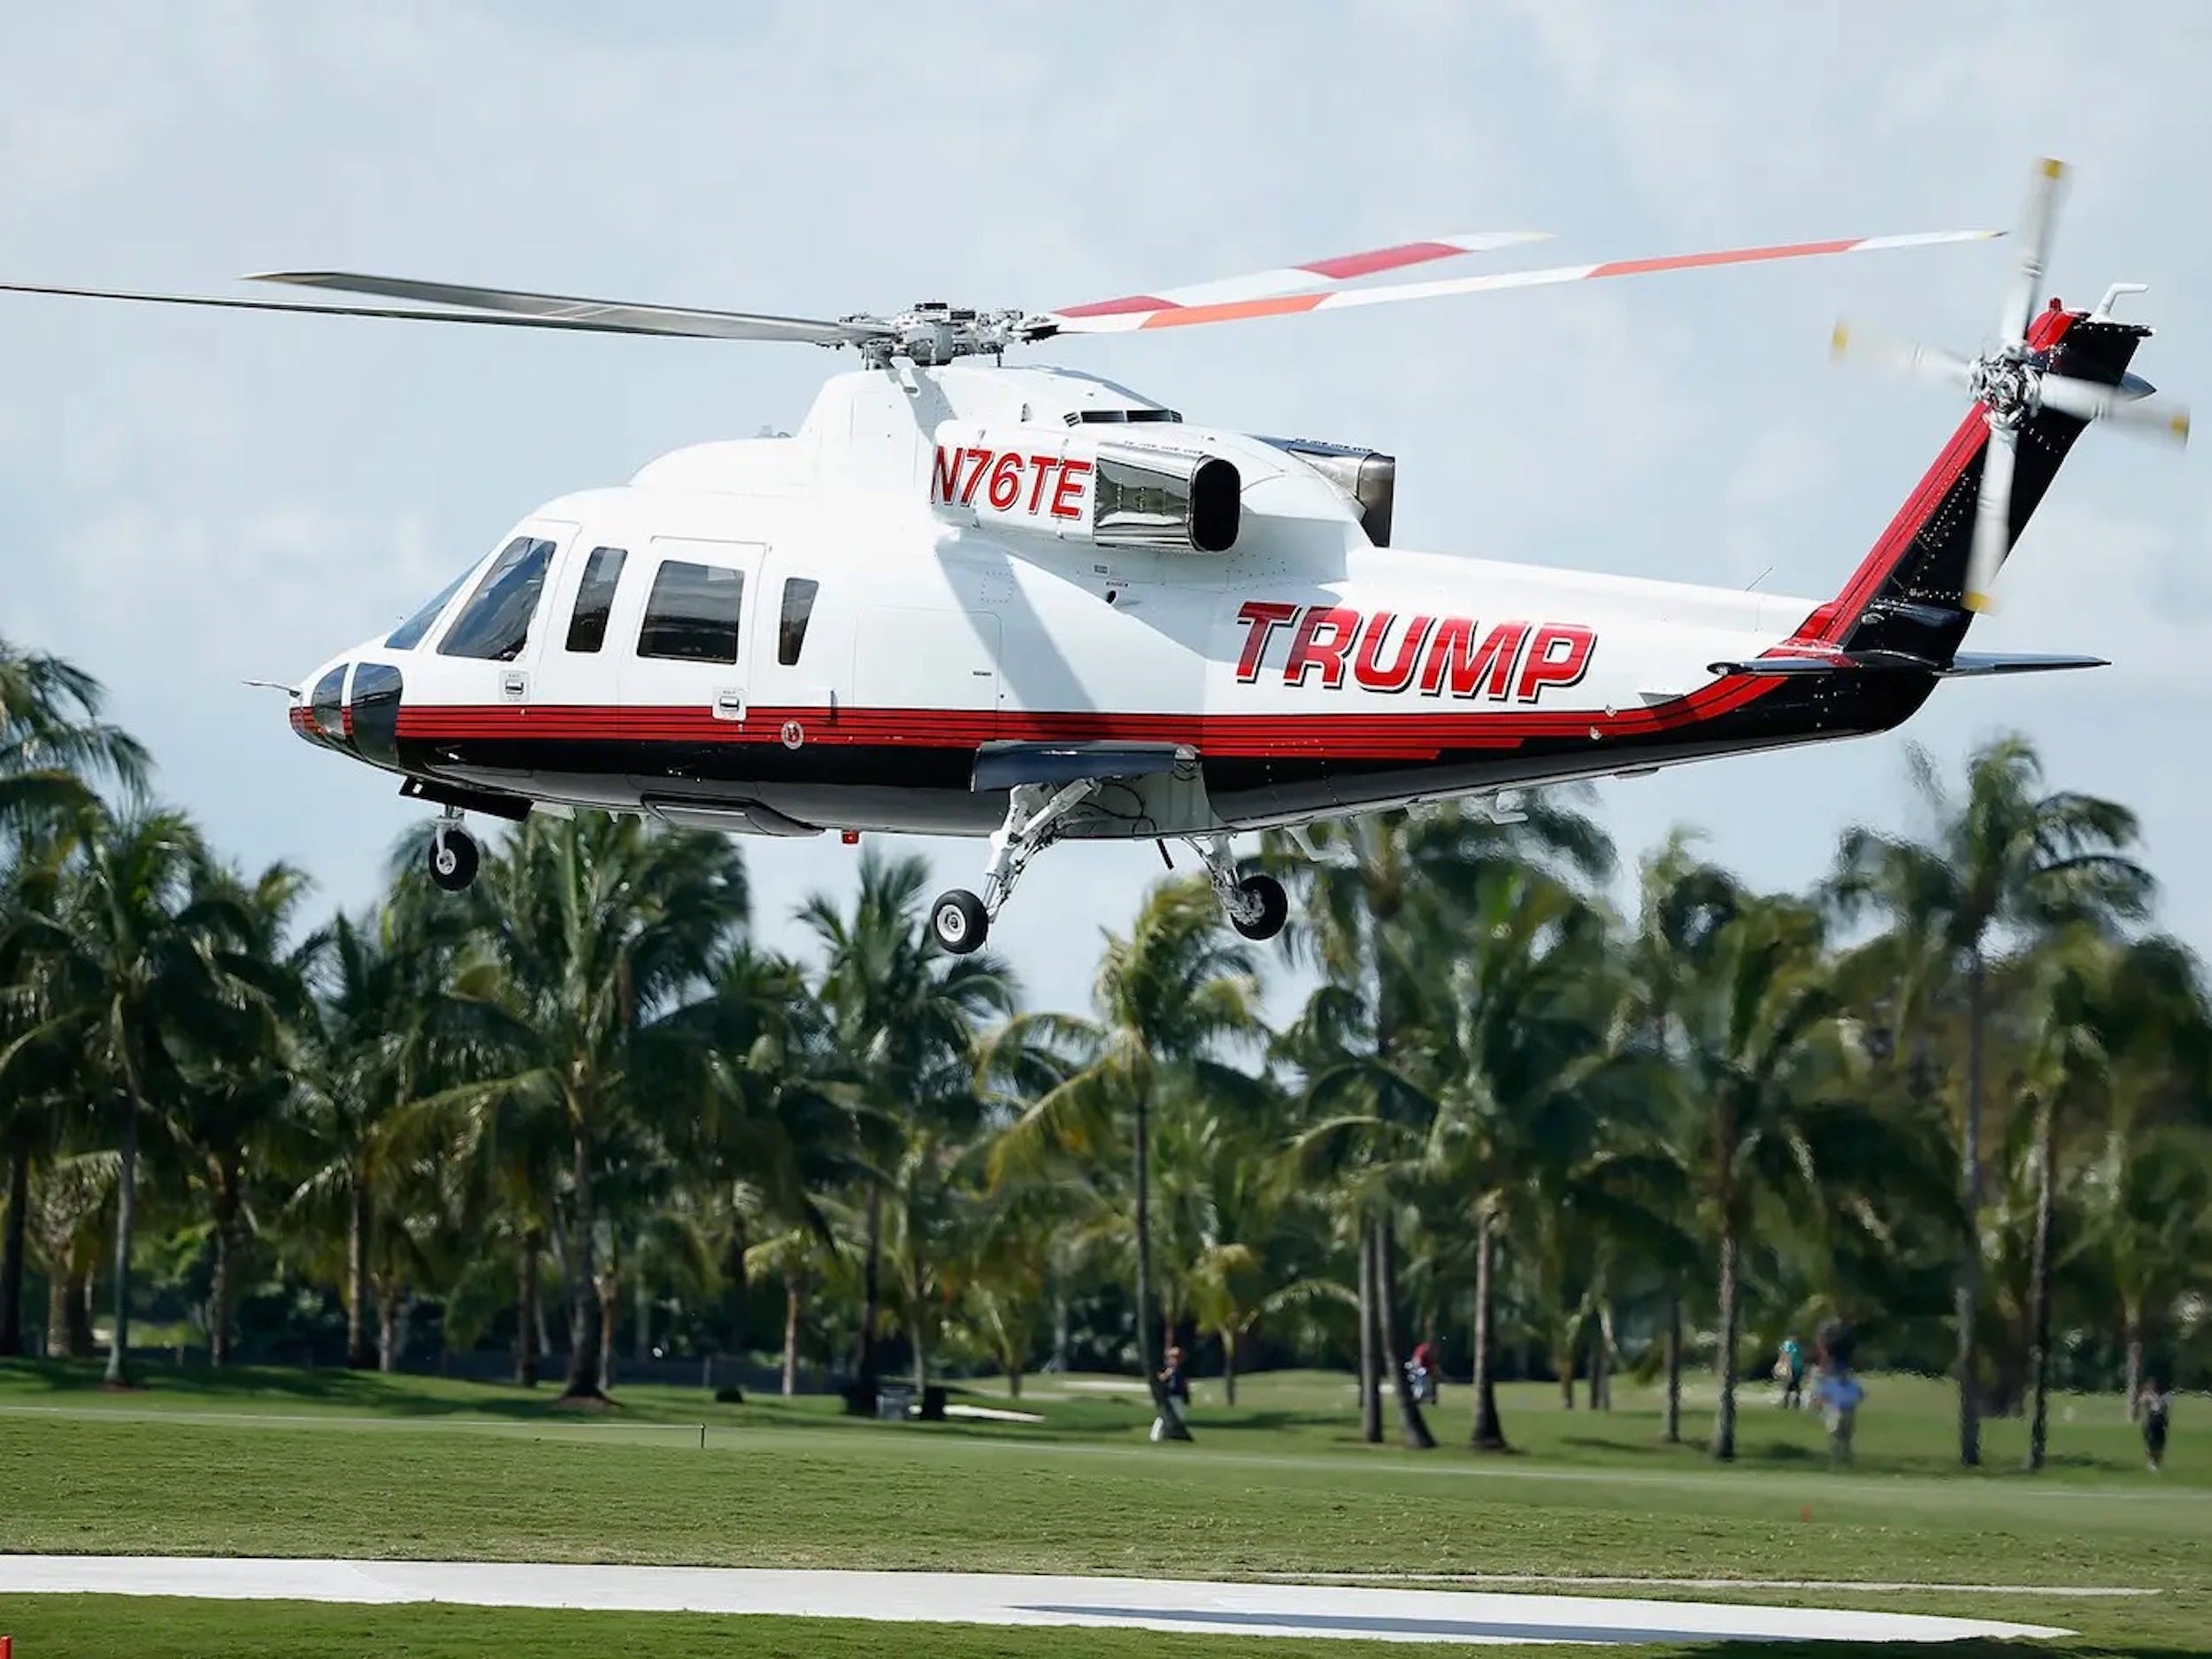 Trump's Sikorsky helicopter.